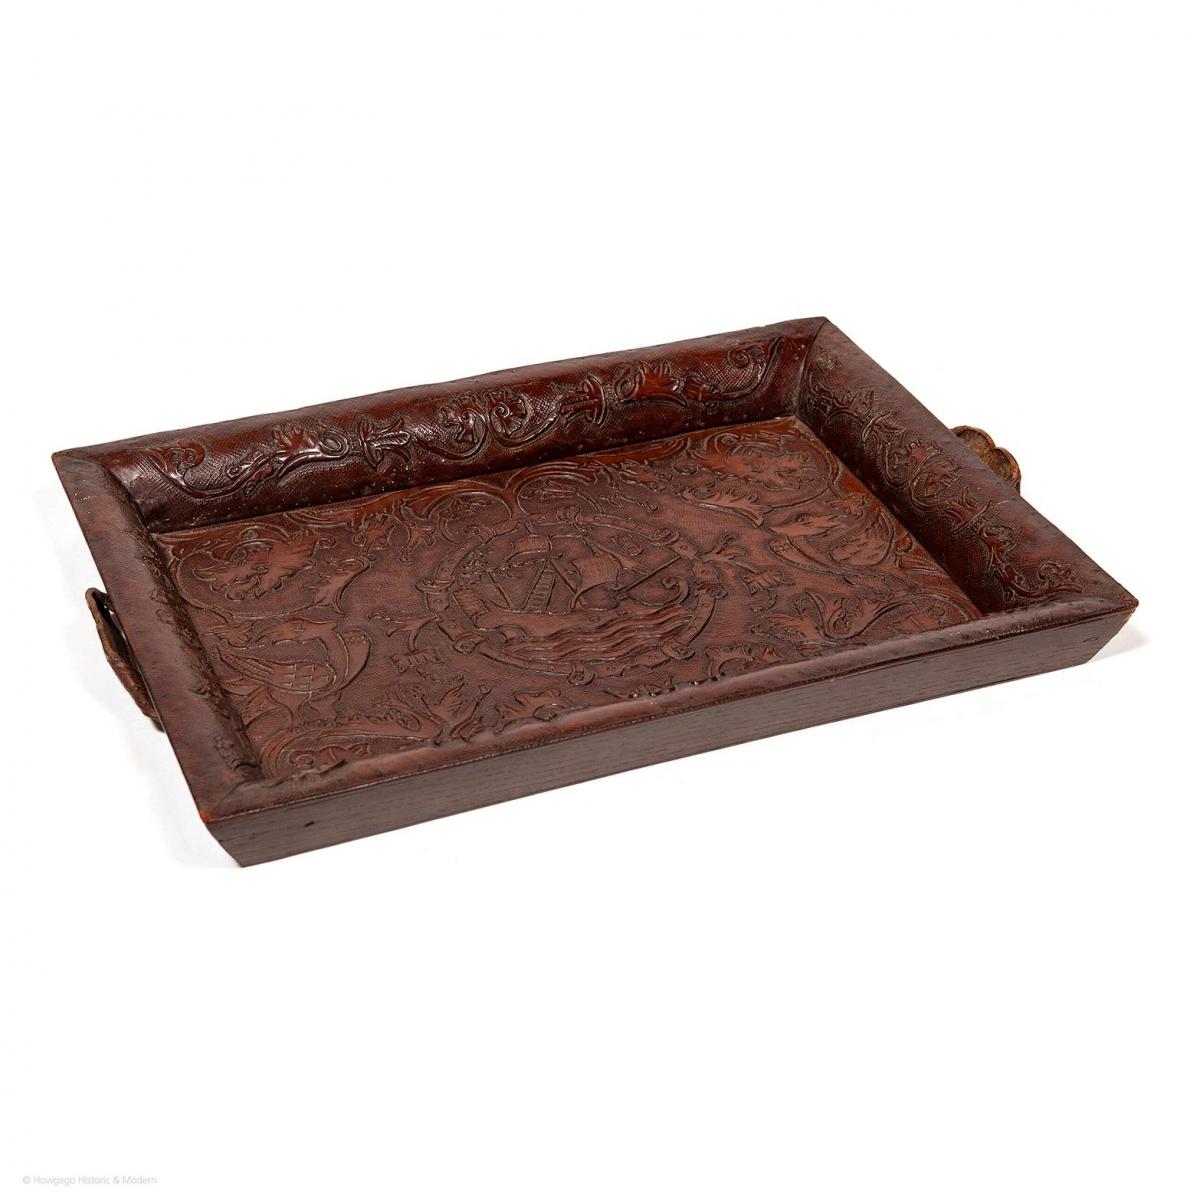 Nautical Theme Leather Embossed Tray